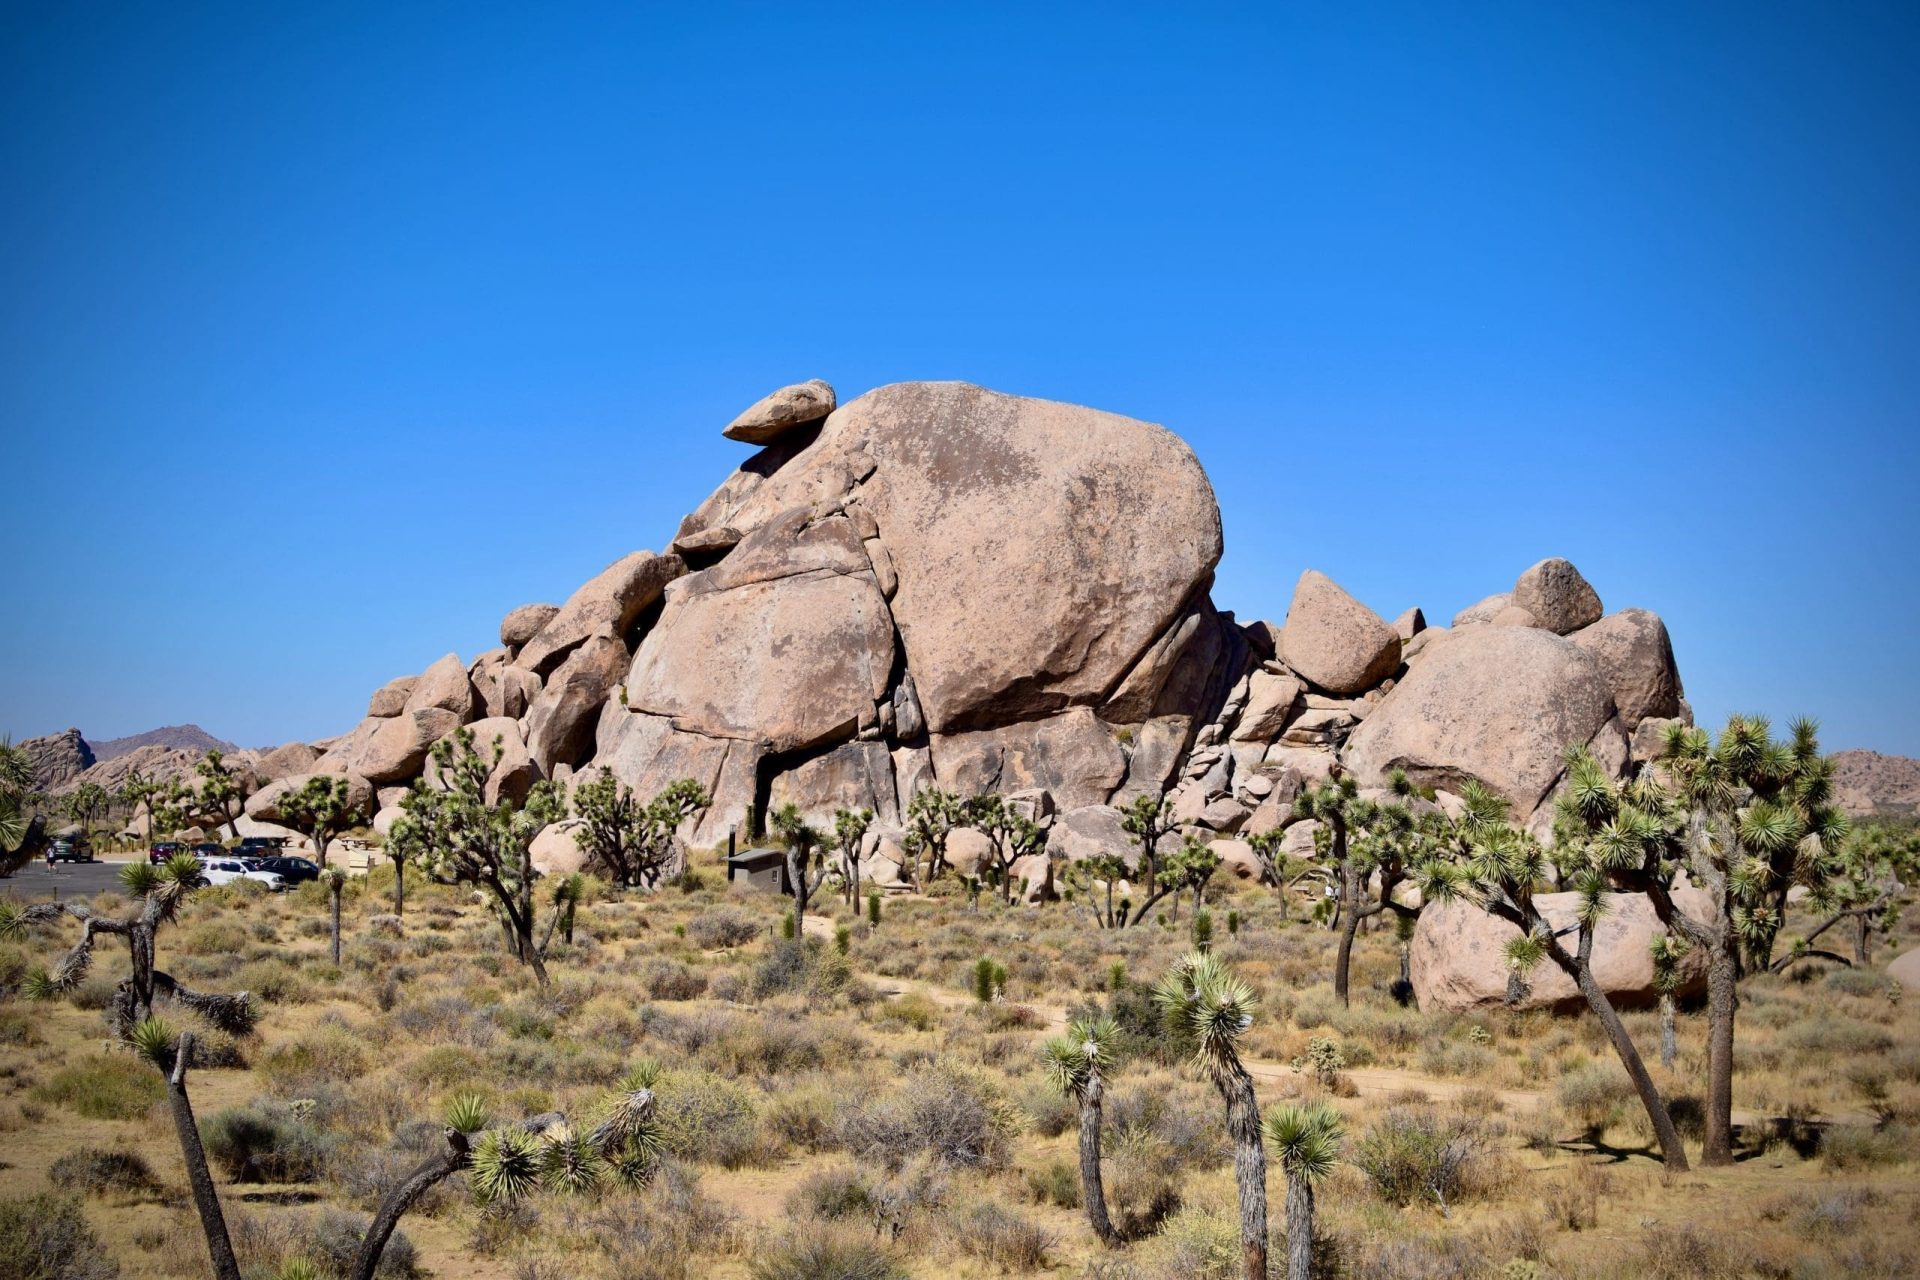 Joshua Tree National Park Self-Guided Driving Tour